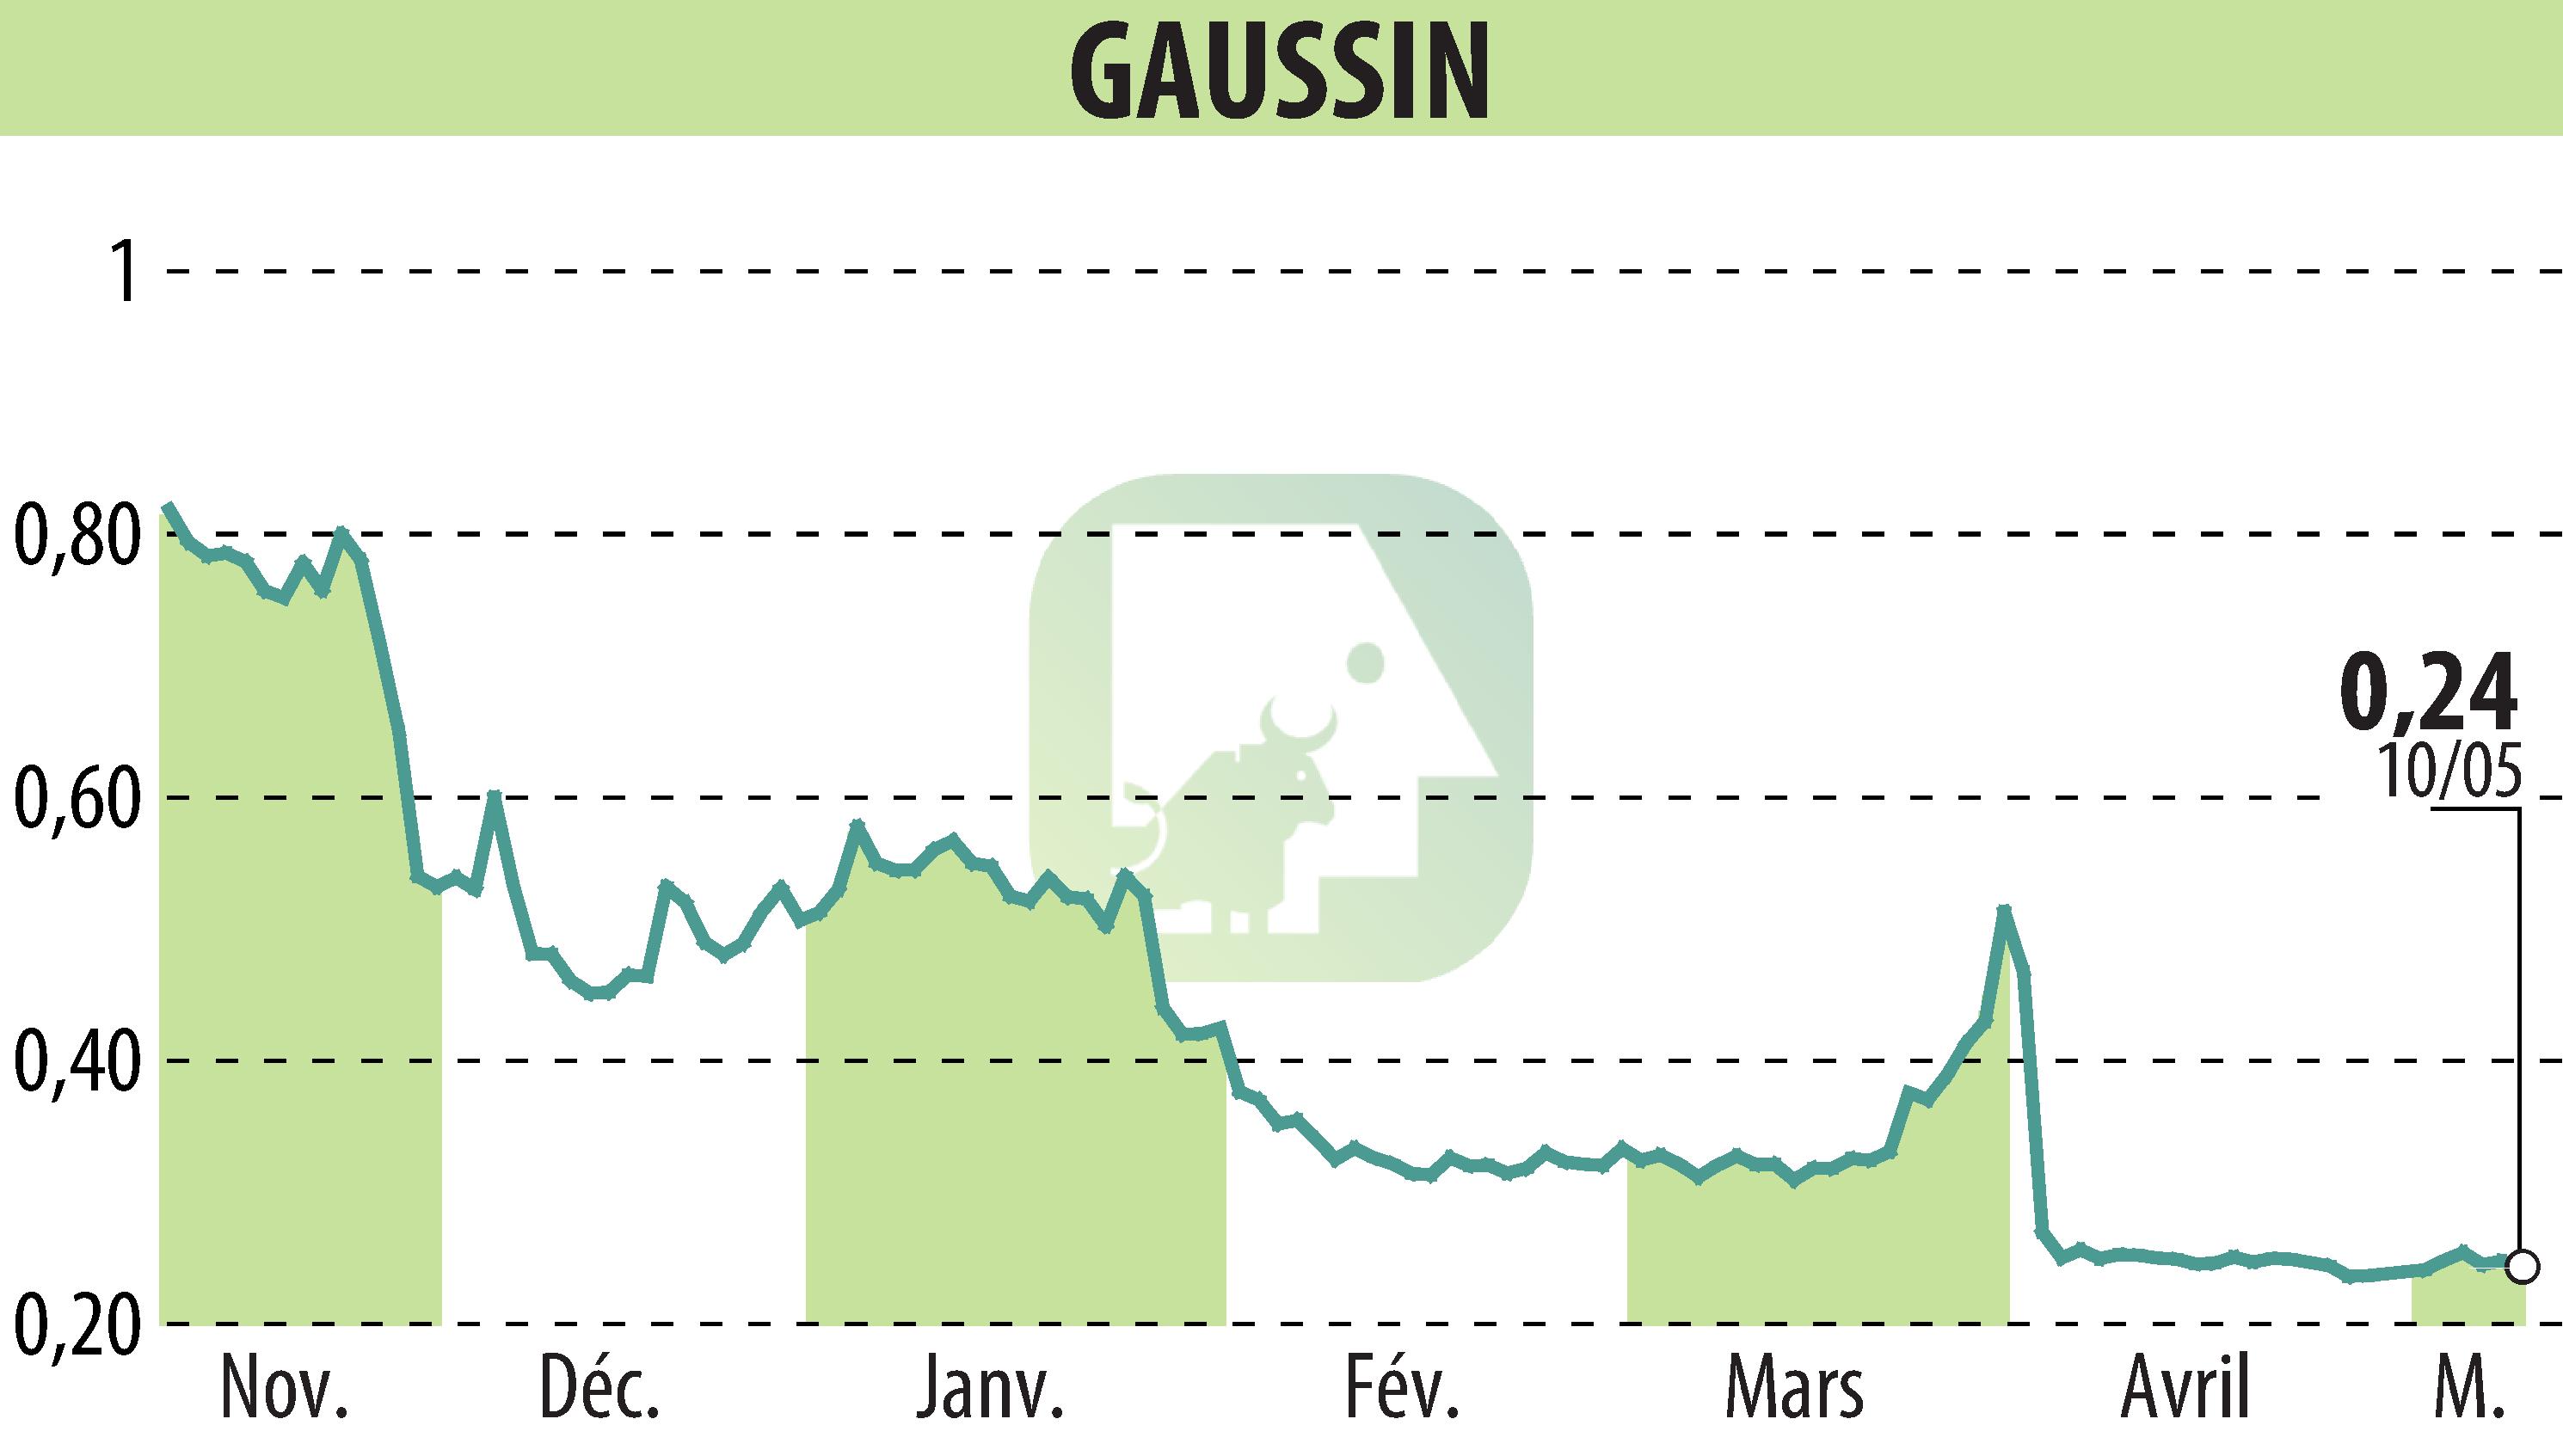 Stock price chart of GAUSSIN (EPA:ALGAU) showing fluctuations.